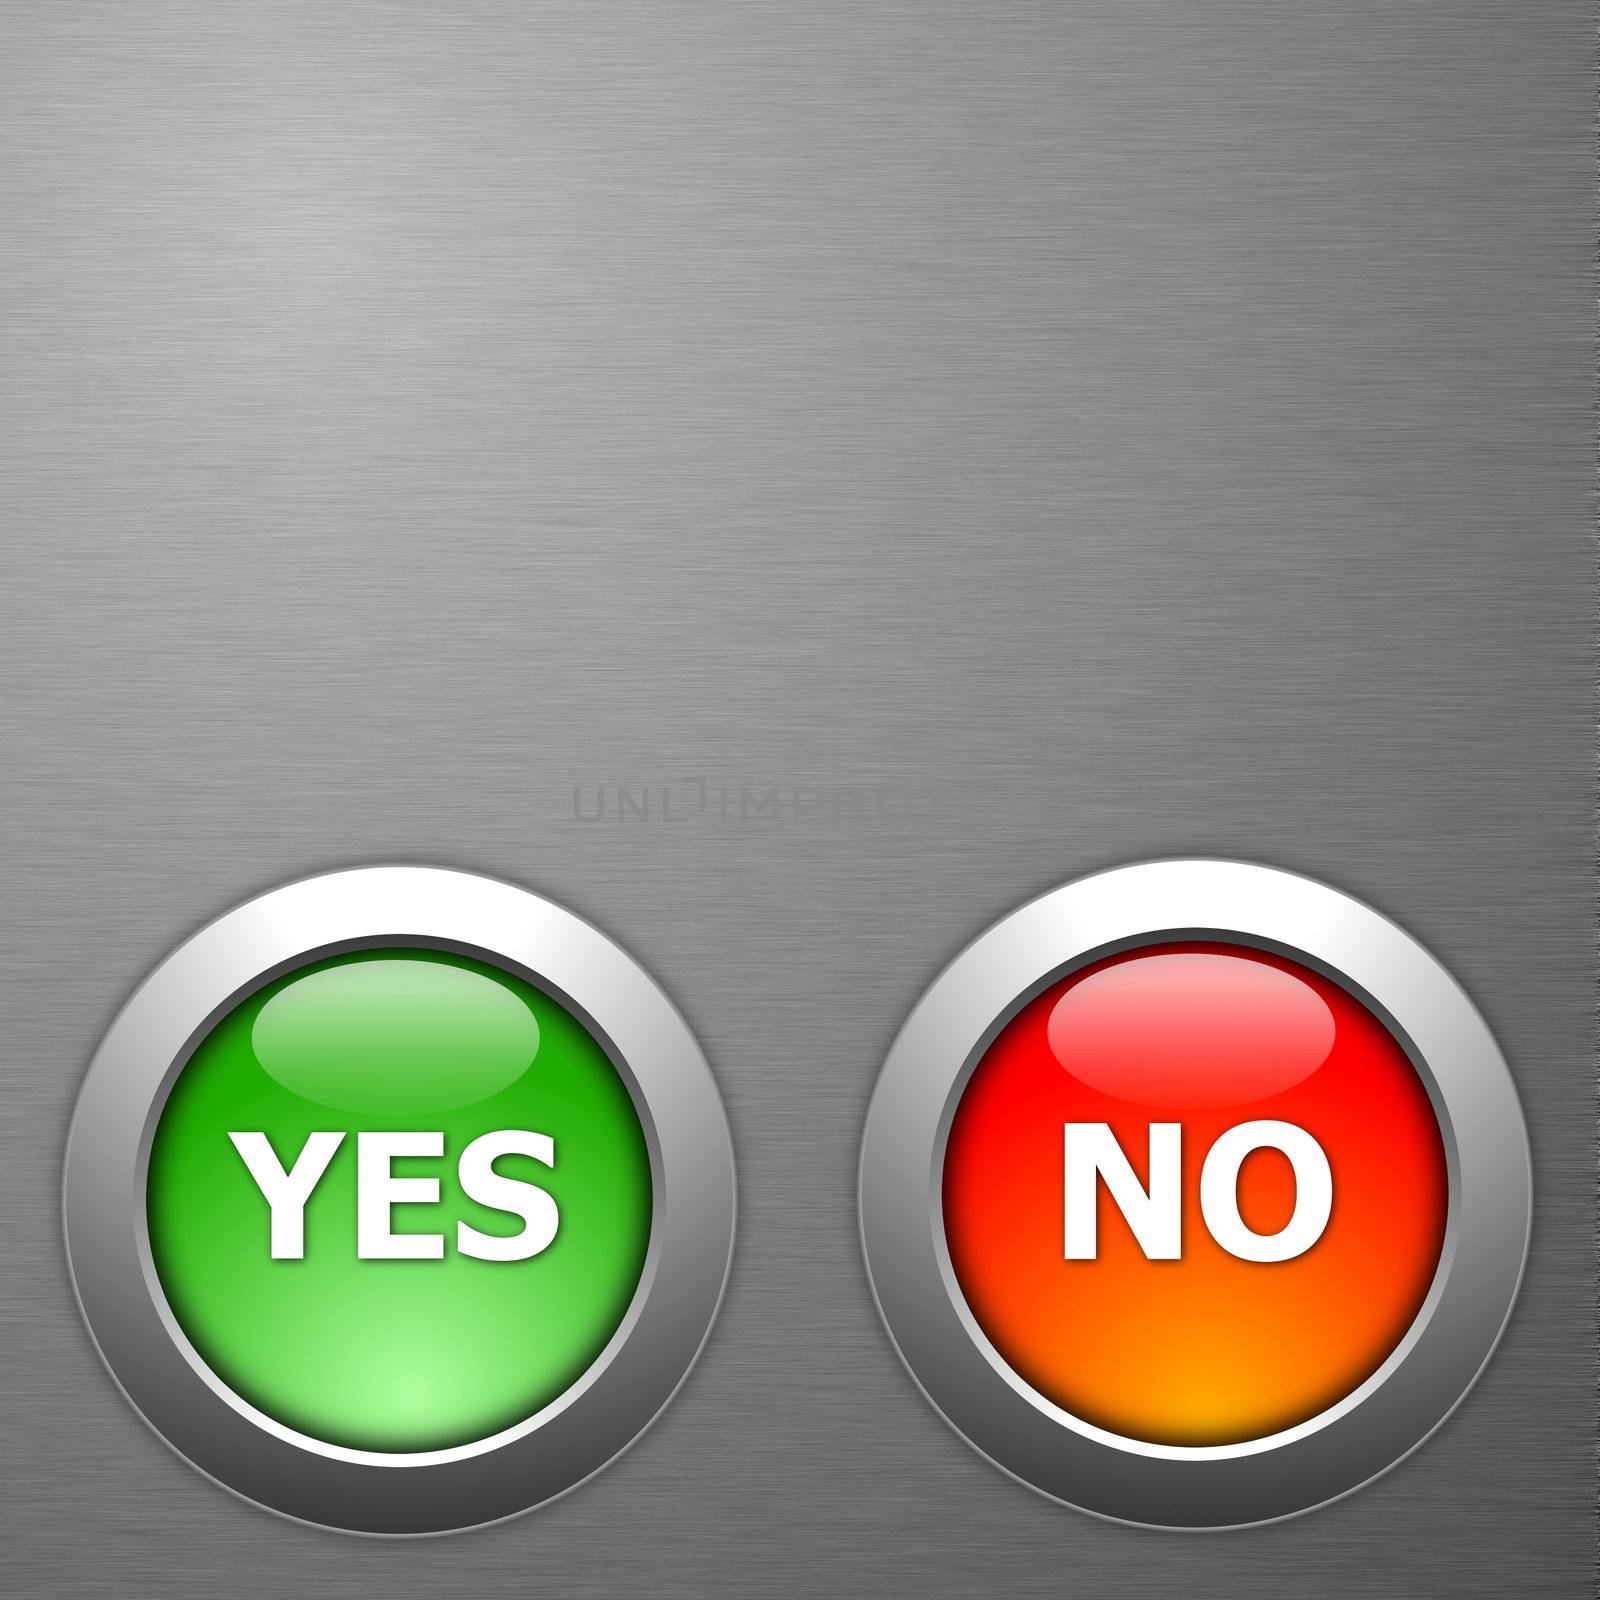 yes and no button by gunnar3000